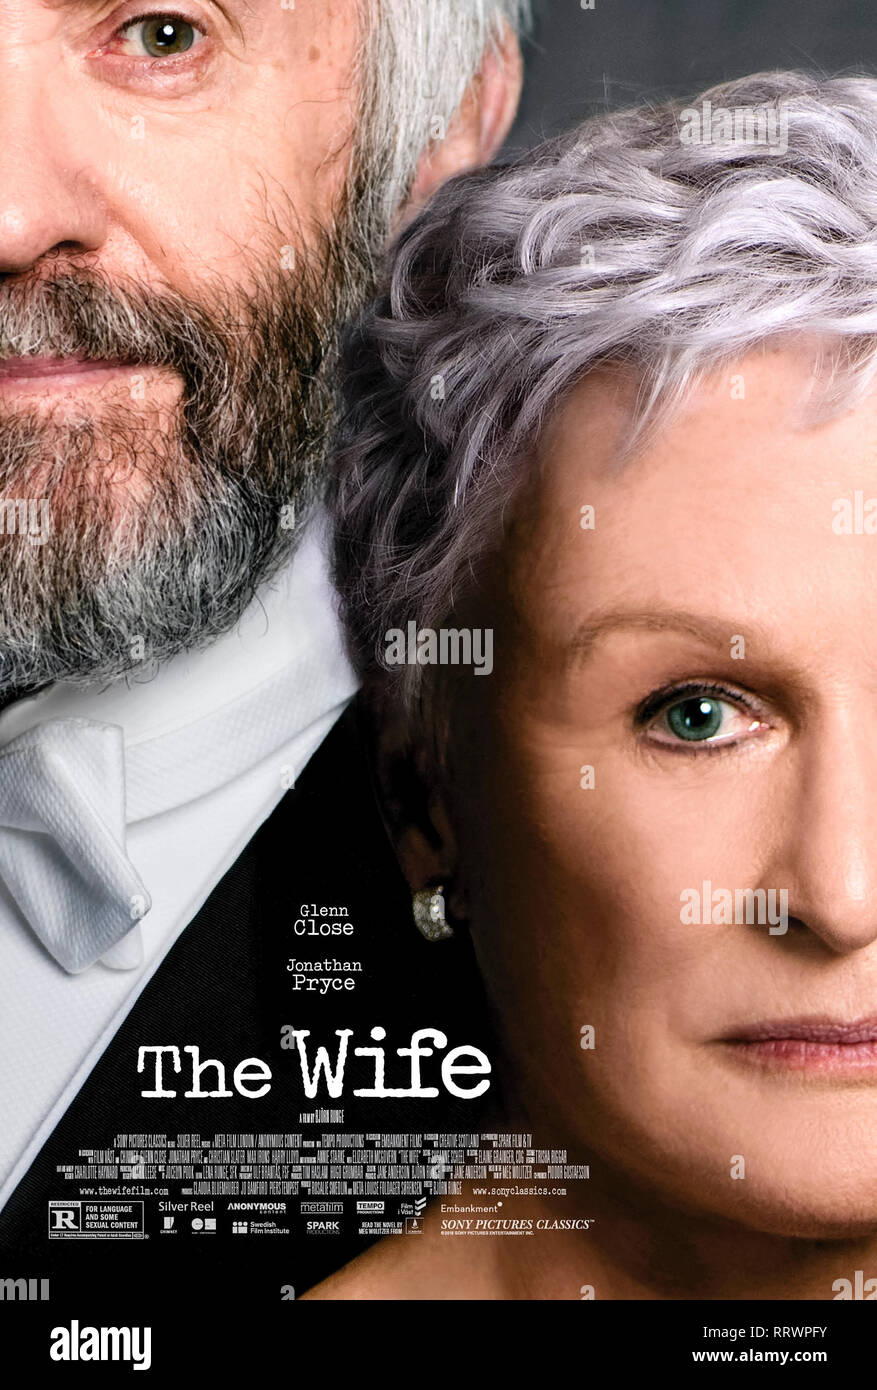 The Wife (2017) directed by Björn Runge and starring Glenn Close, Jonathan Pryce, Max Irons and Christian Slater. Stock Photo